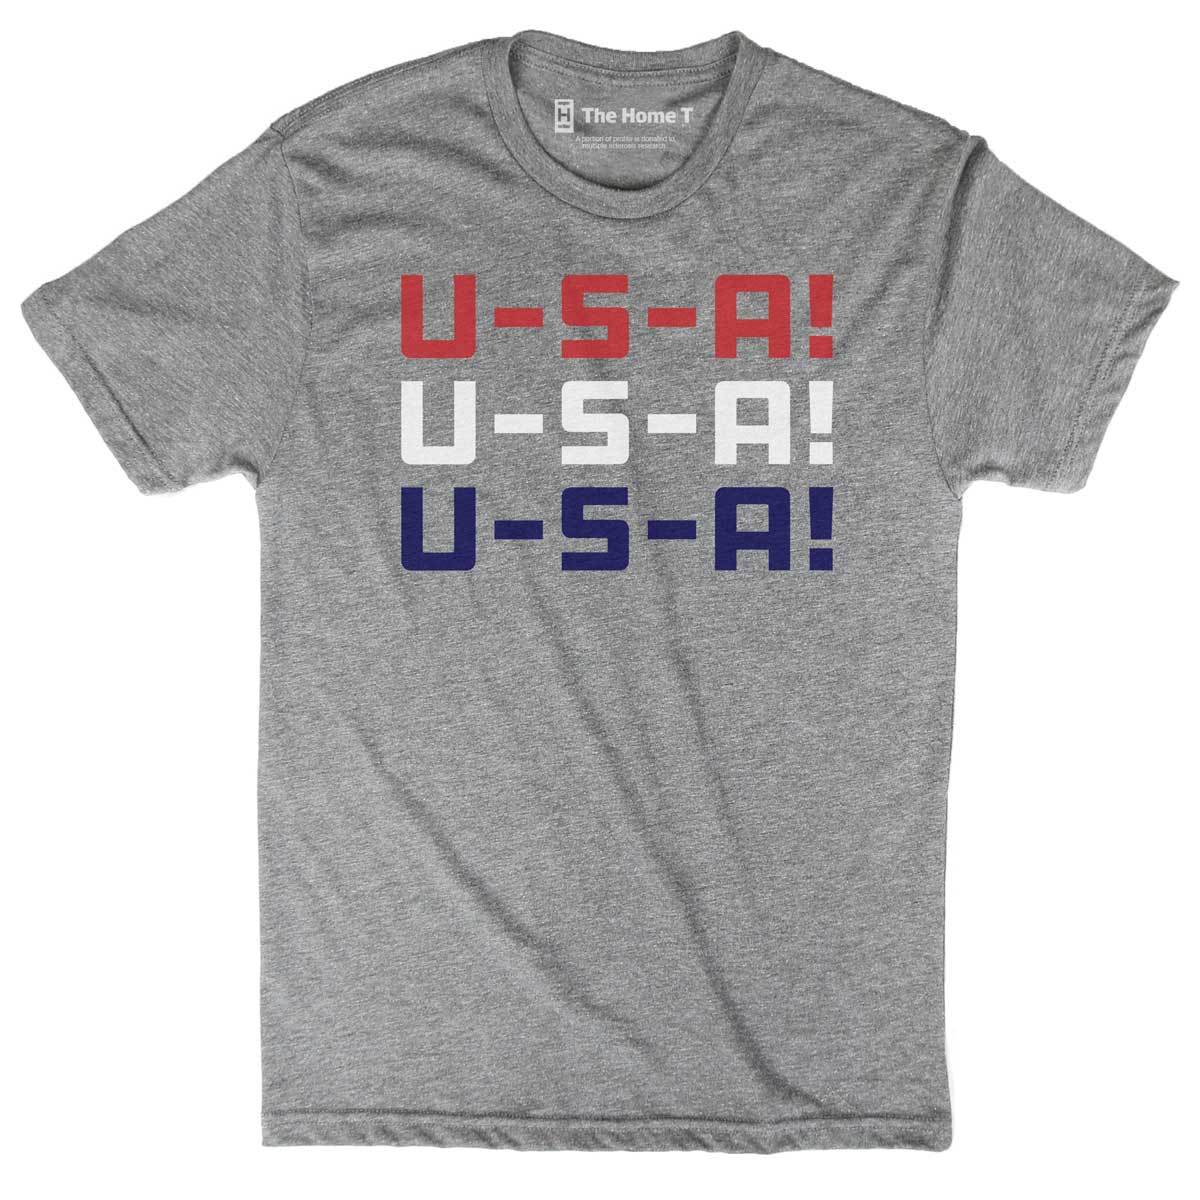 U-S-A Chant! The Home T XS Athletic Grey Crew Neck